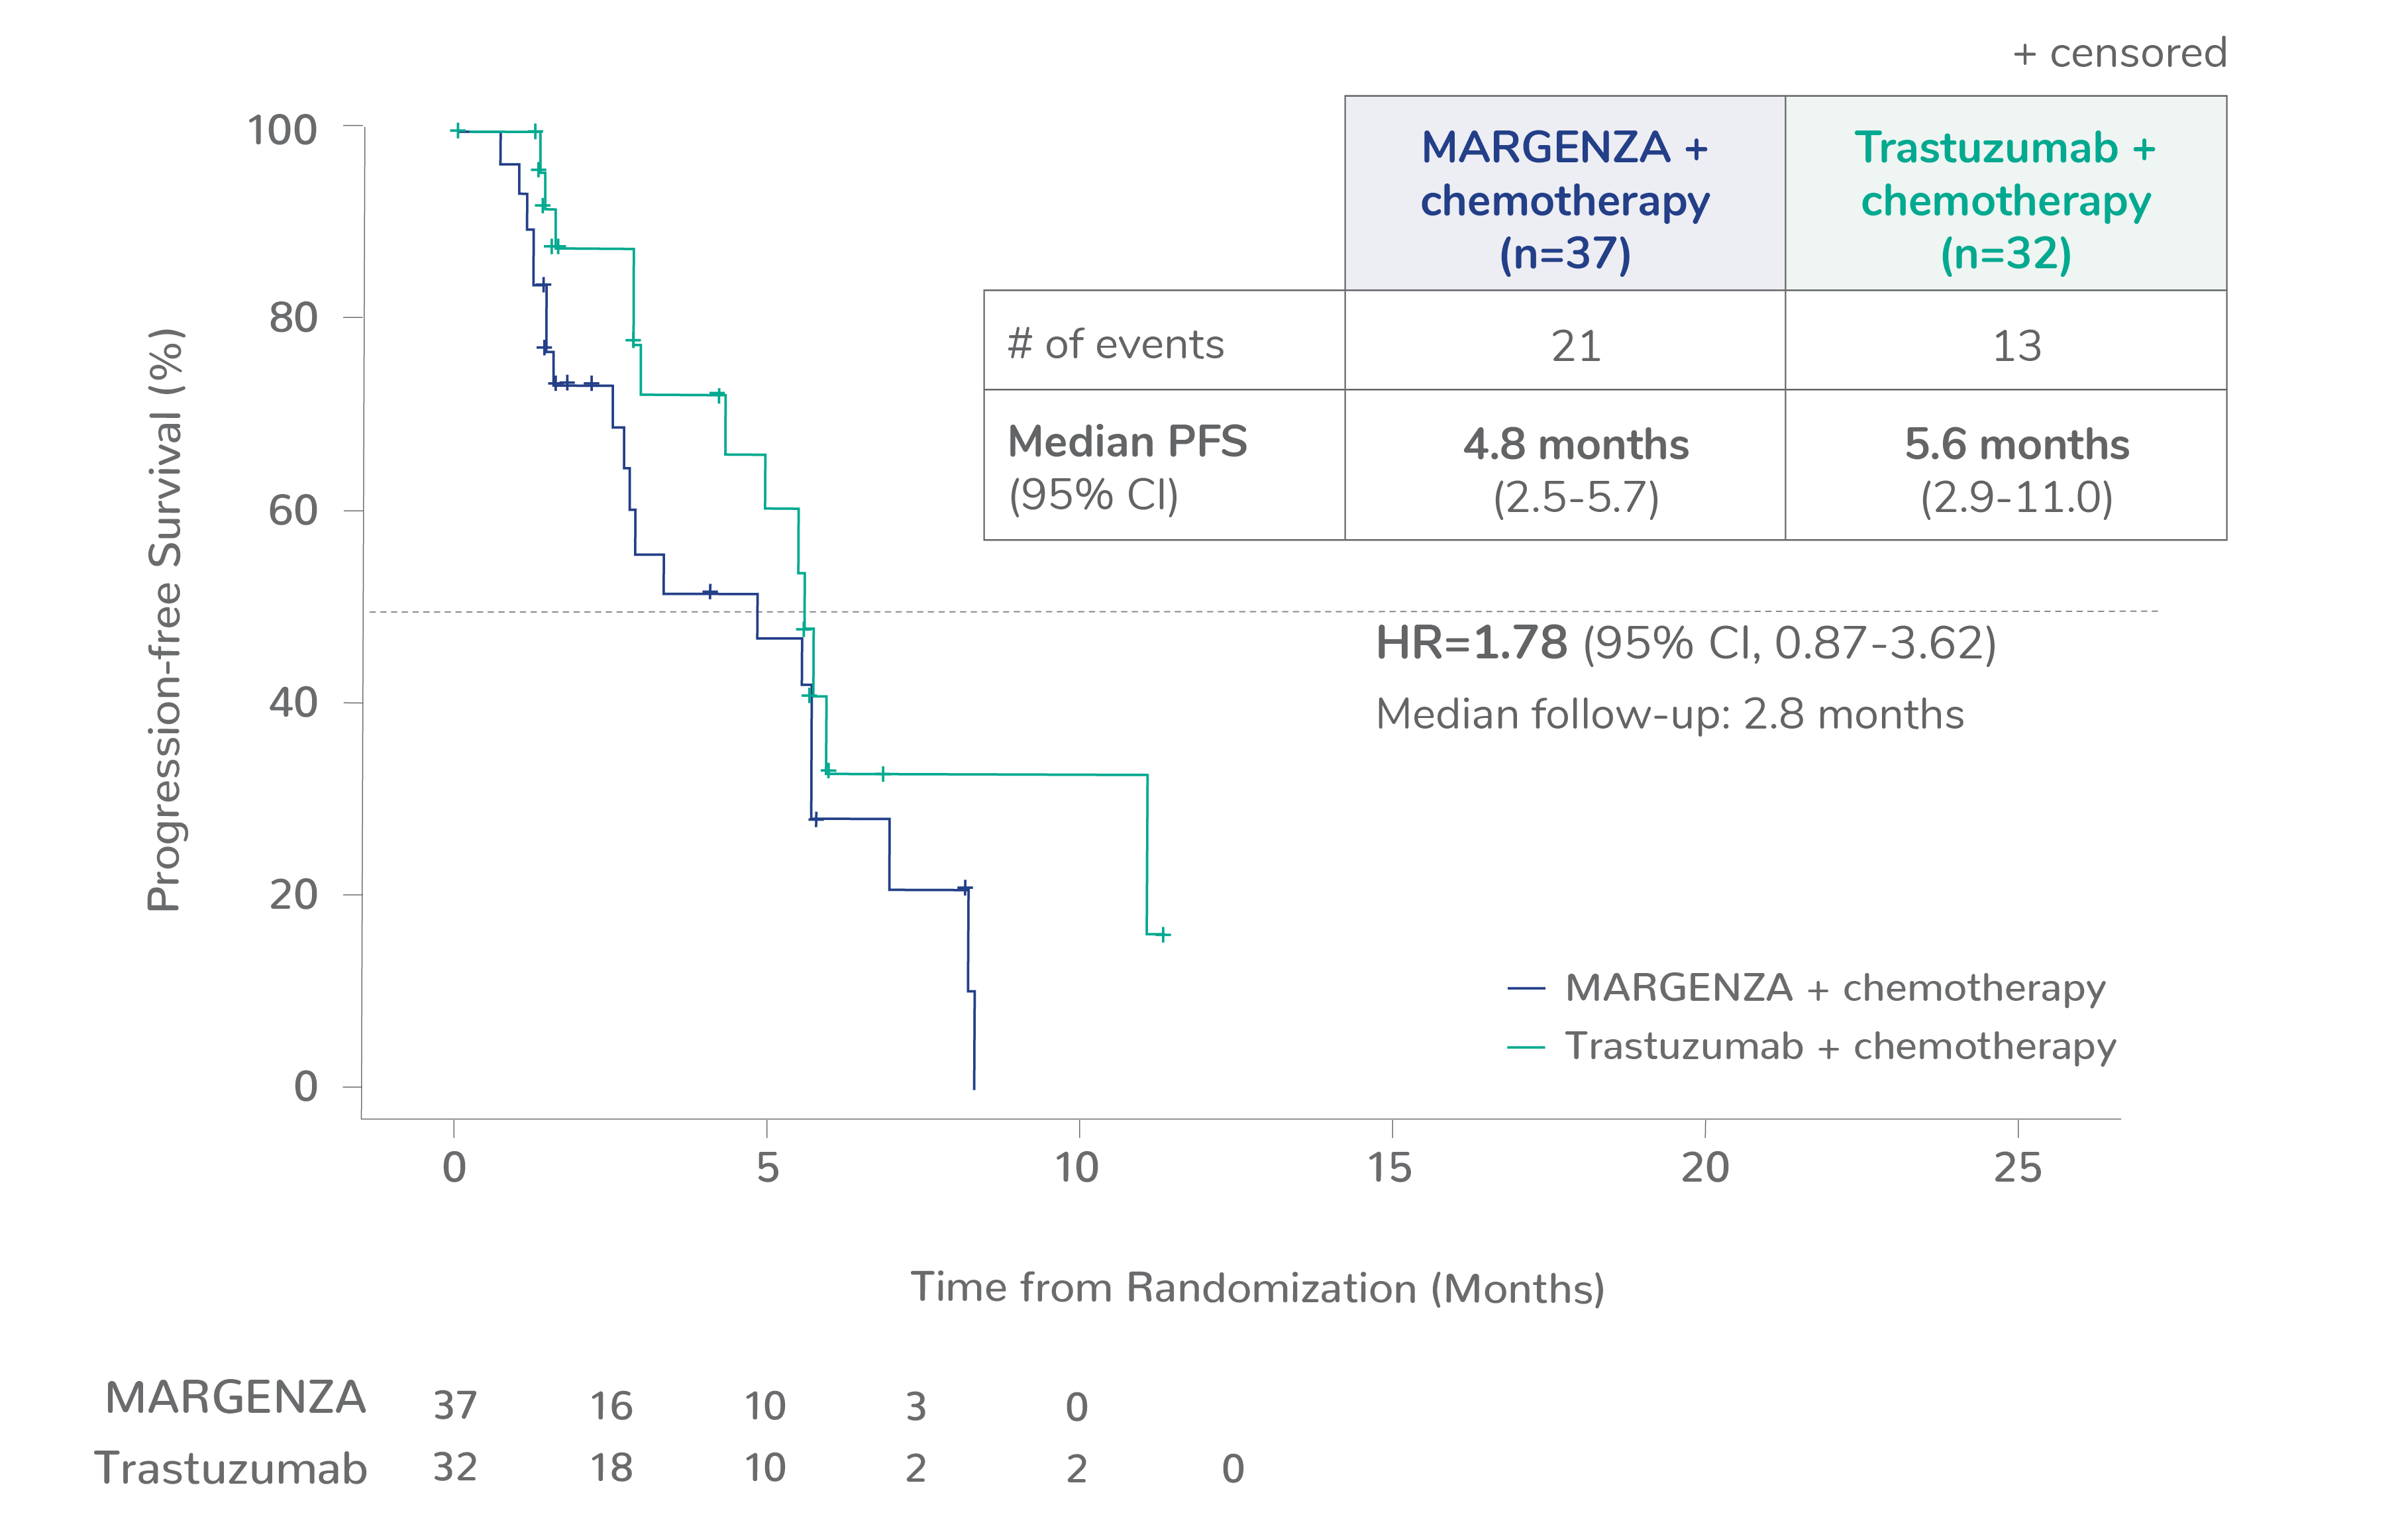 Kaplan Meyer curve showing median progression-free survival for CD16A VV genotype of 4.8 months for MARGENZA plus chemotherapy in 37 patients compared to 5.6 months for trastuzumab plus chemotherapy in 32 patients. The hazard ratio was 1.78. 